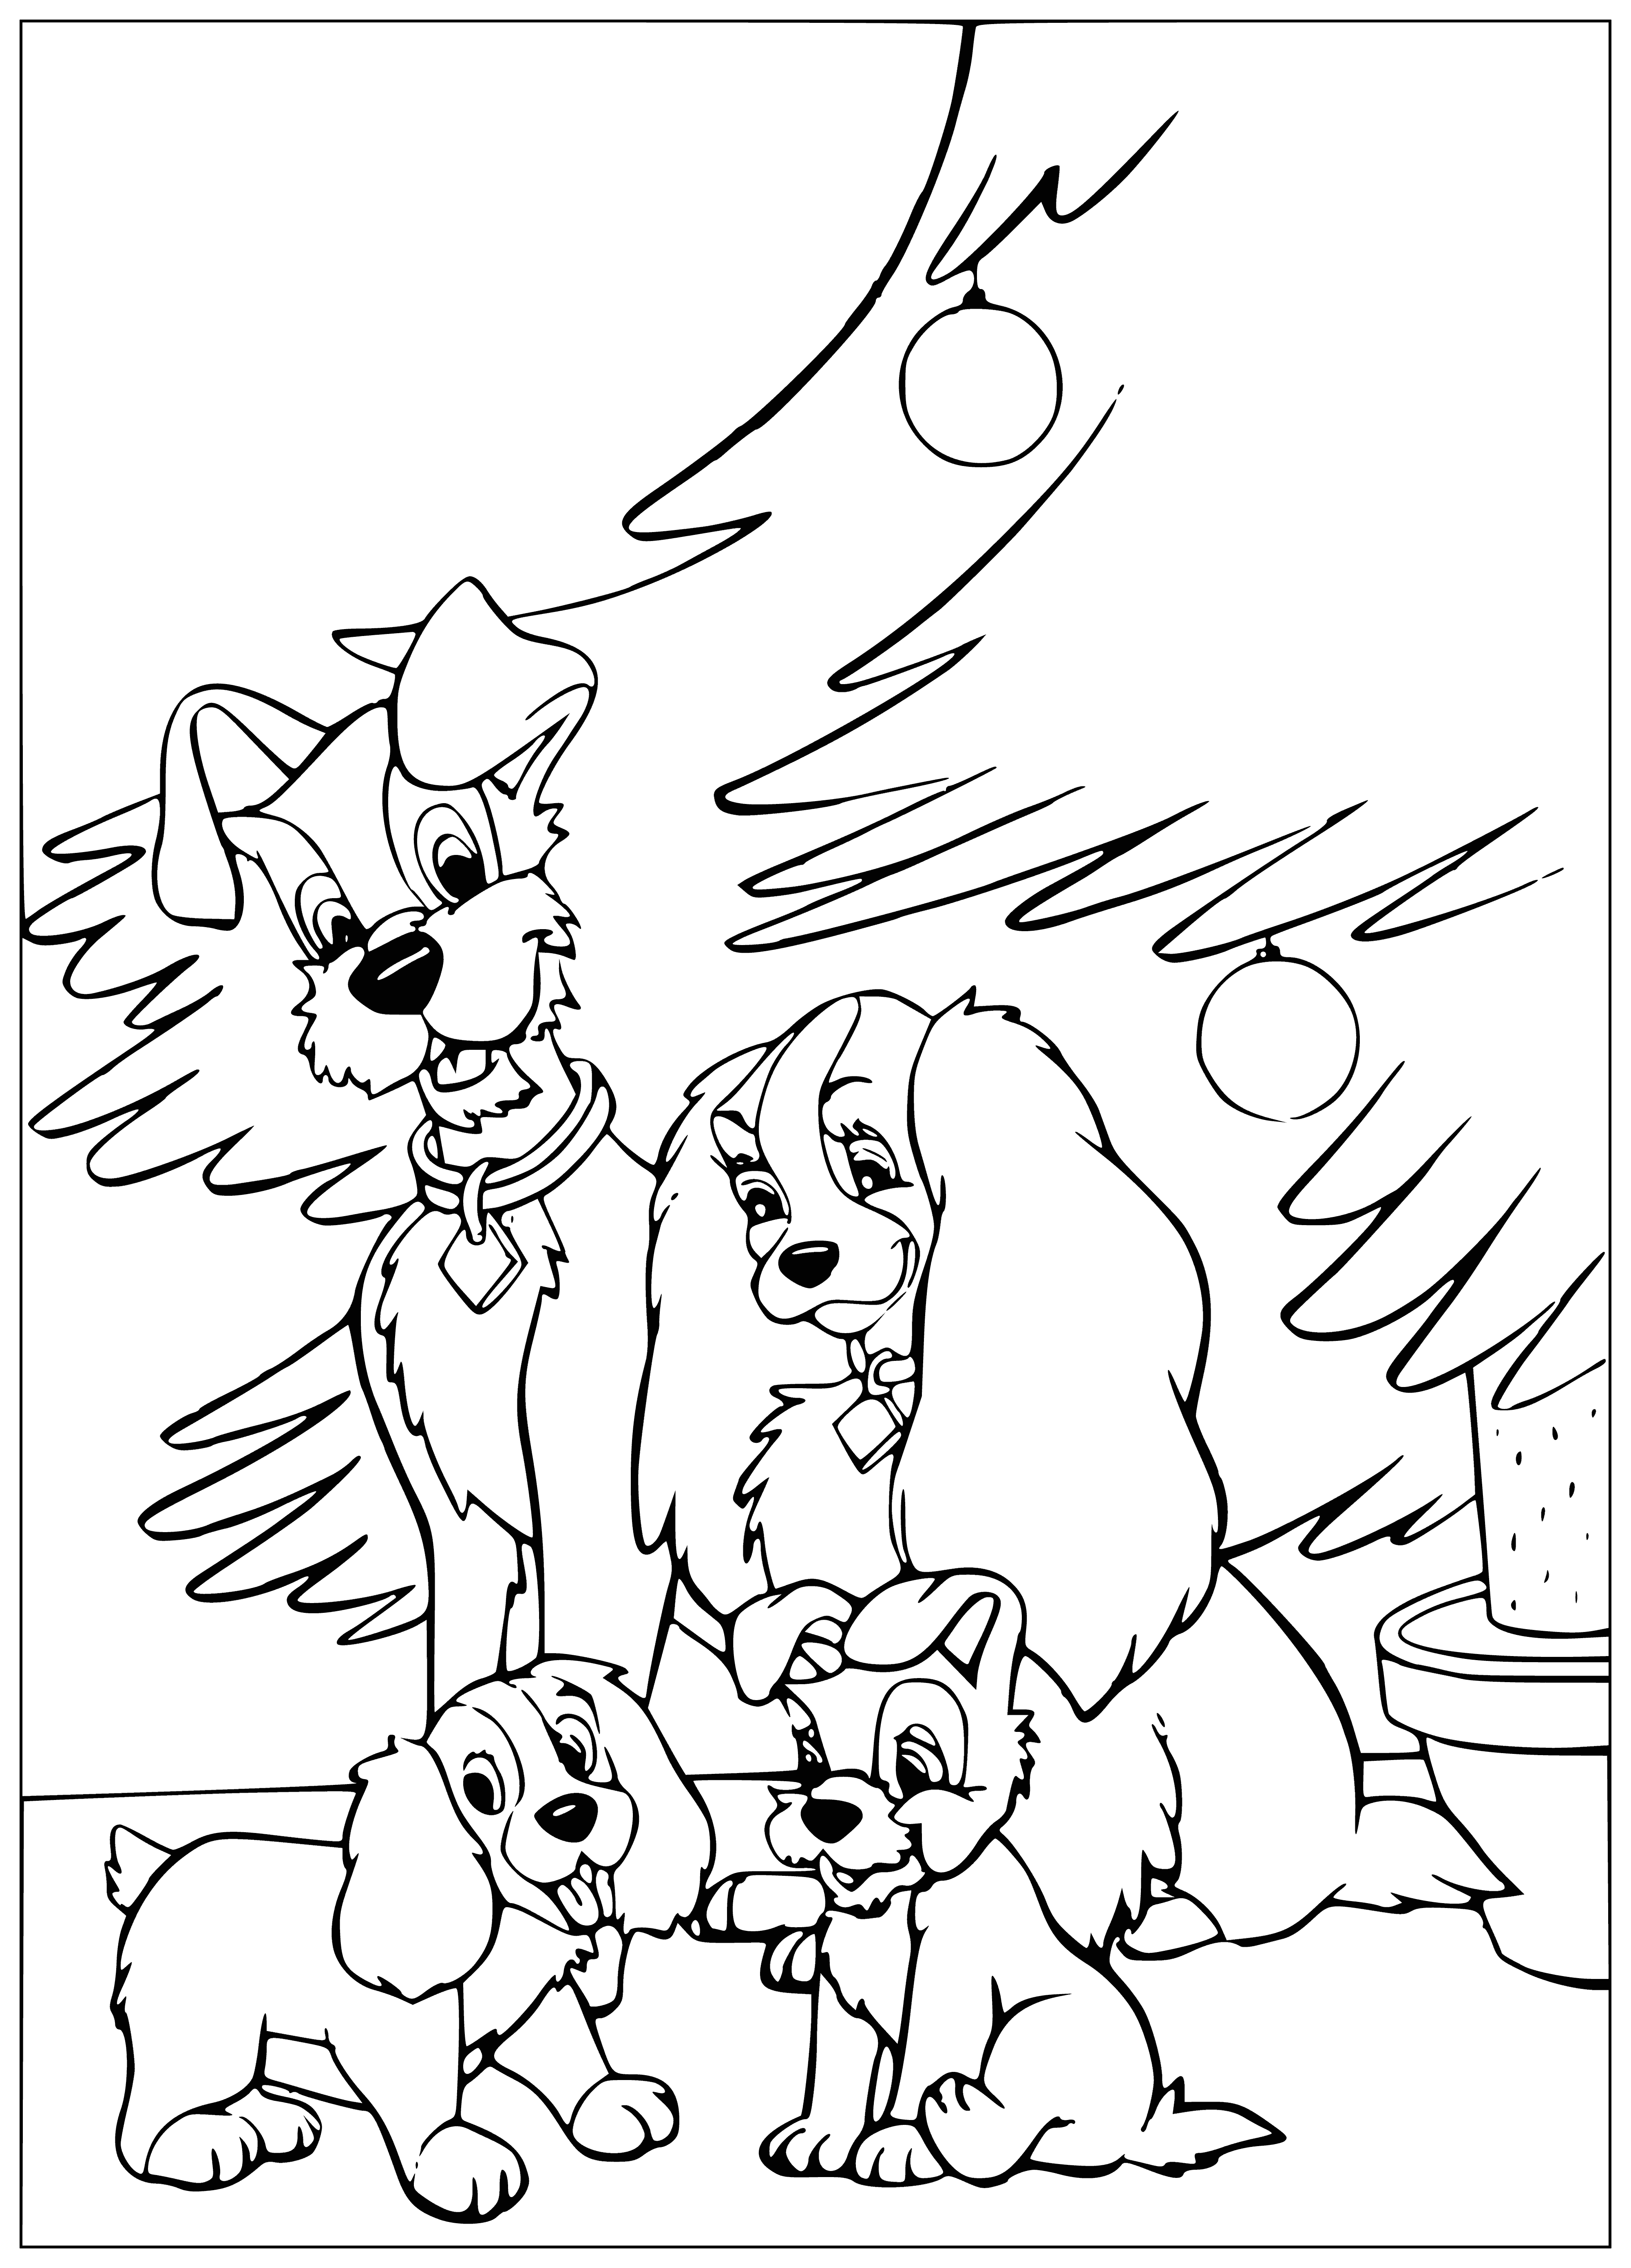 Puppies and dogs coloring page